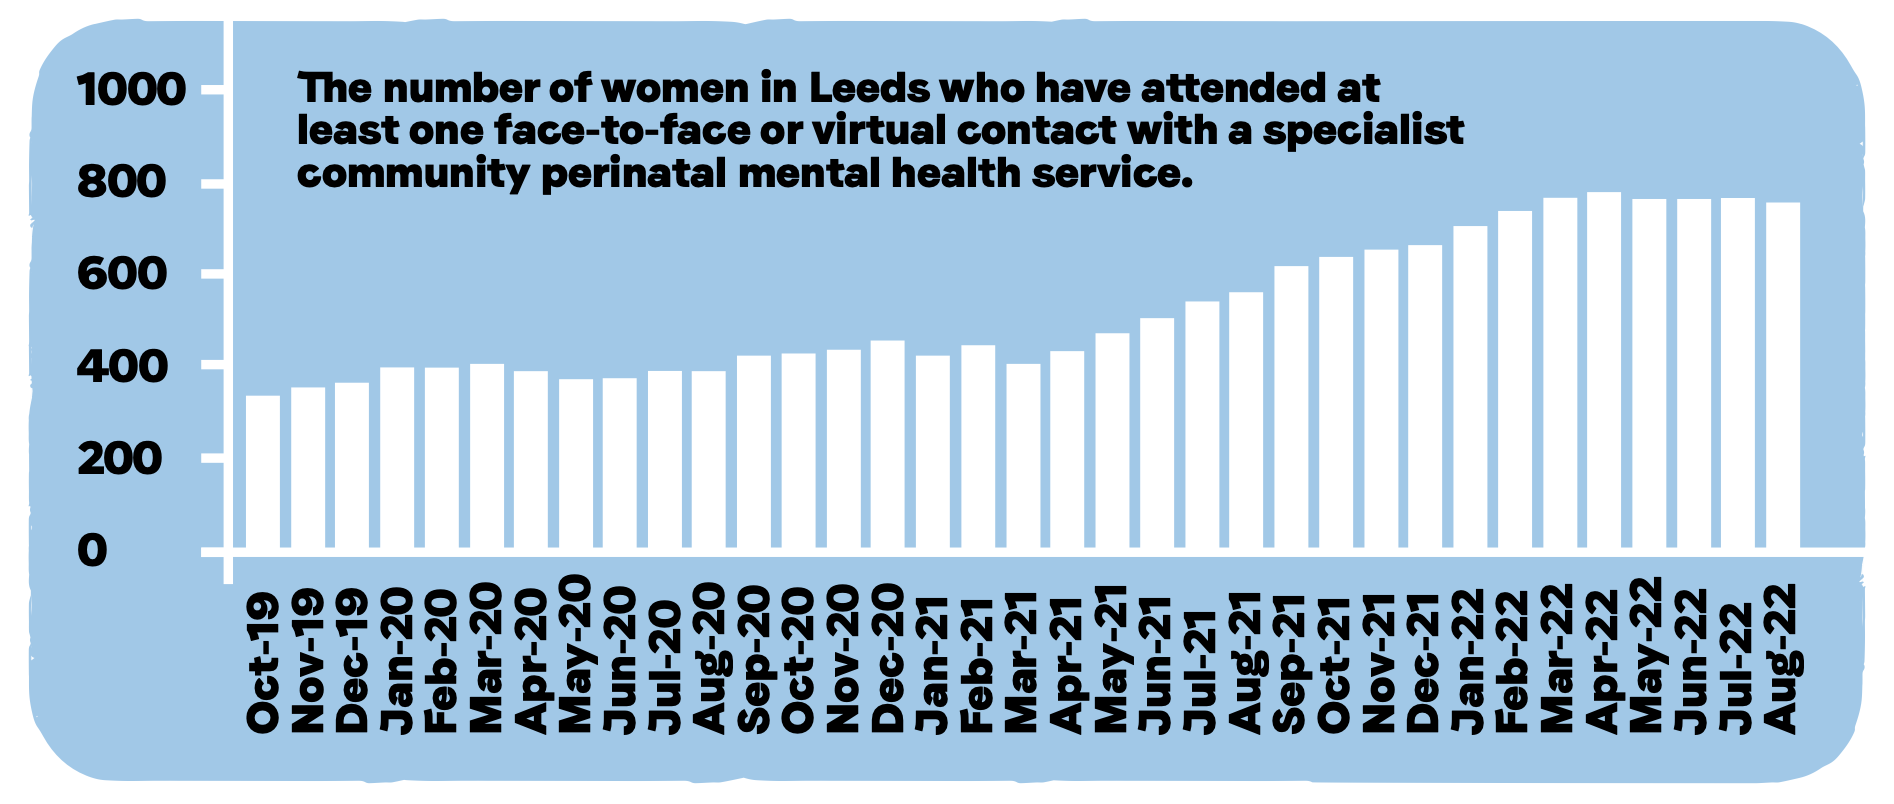 graph showing the number of women in Leeds who have attended at least one face-to-face or virtual contact with a specialist community perinatal mental health service